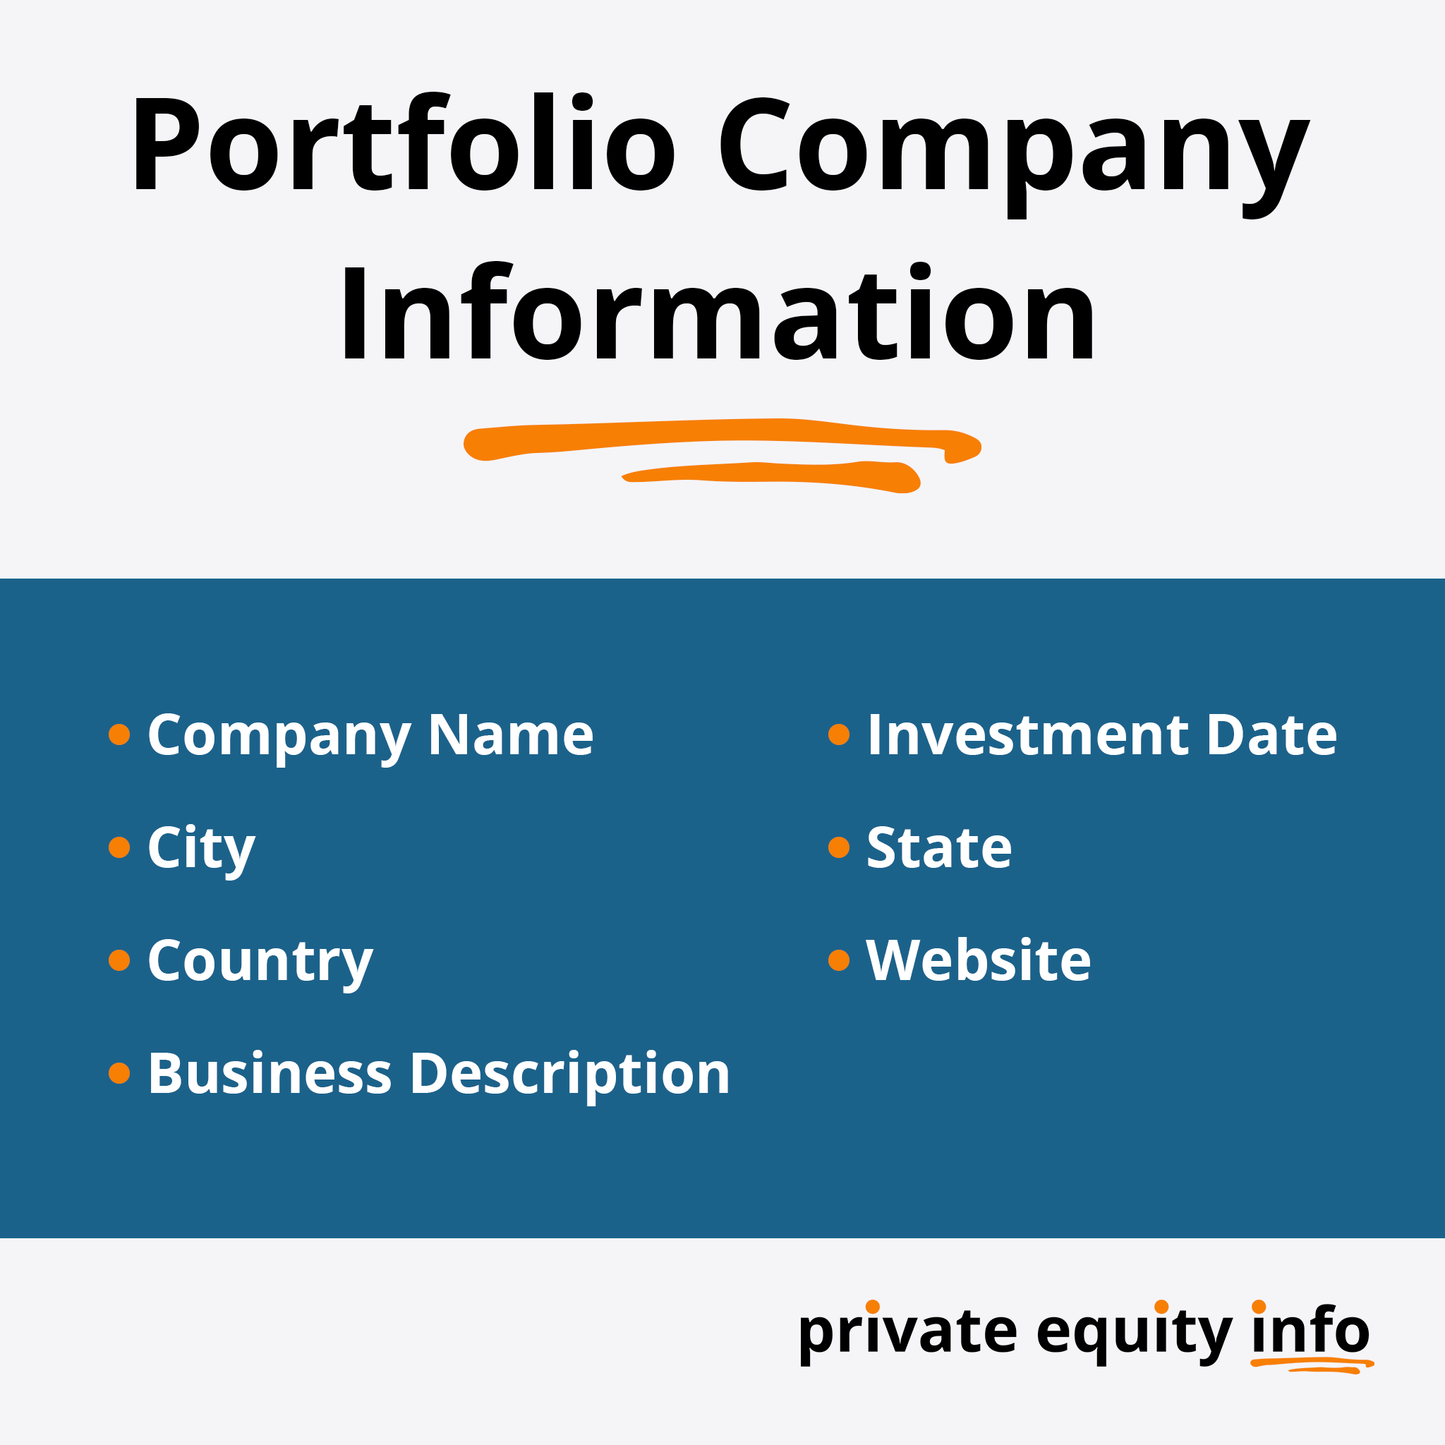 List of Private Equity Firms in the Business Intelligence industry